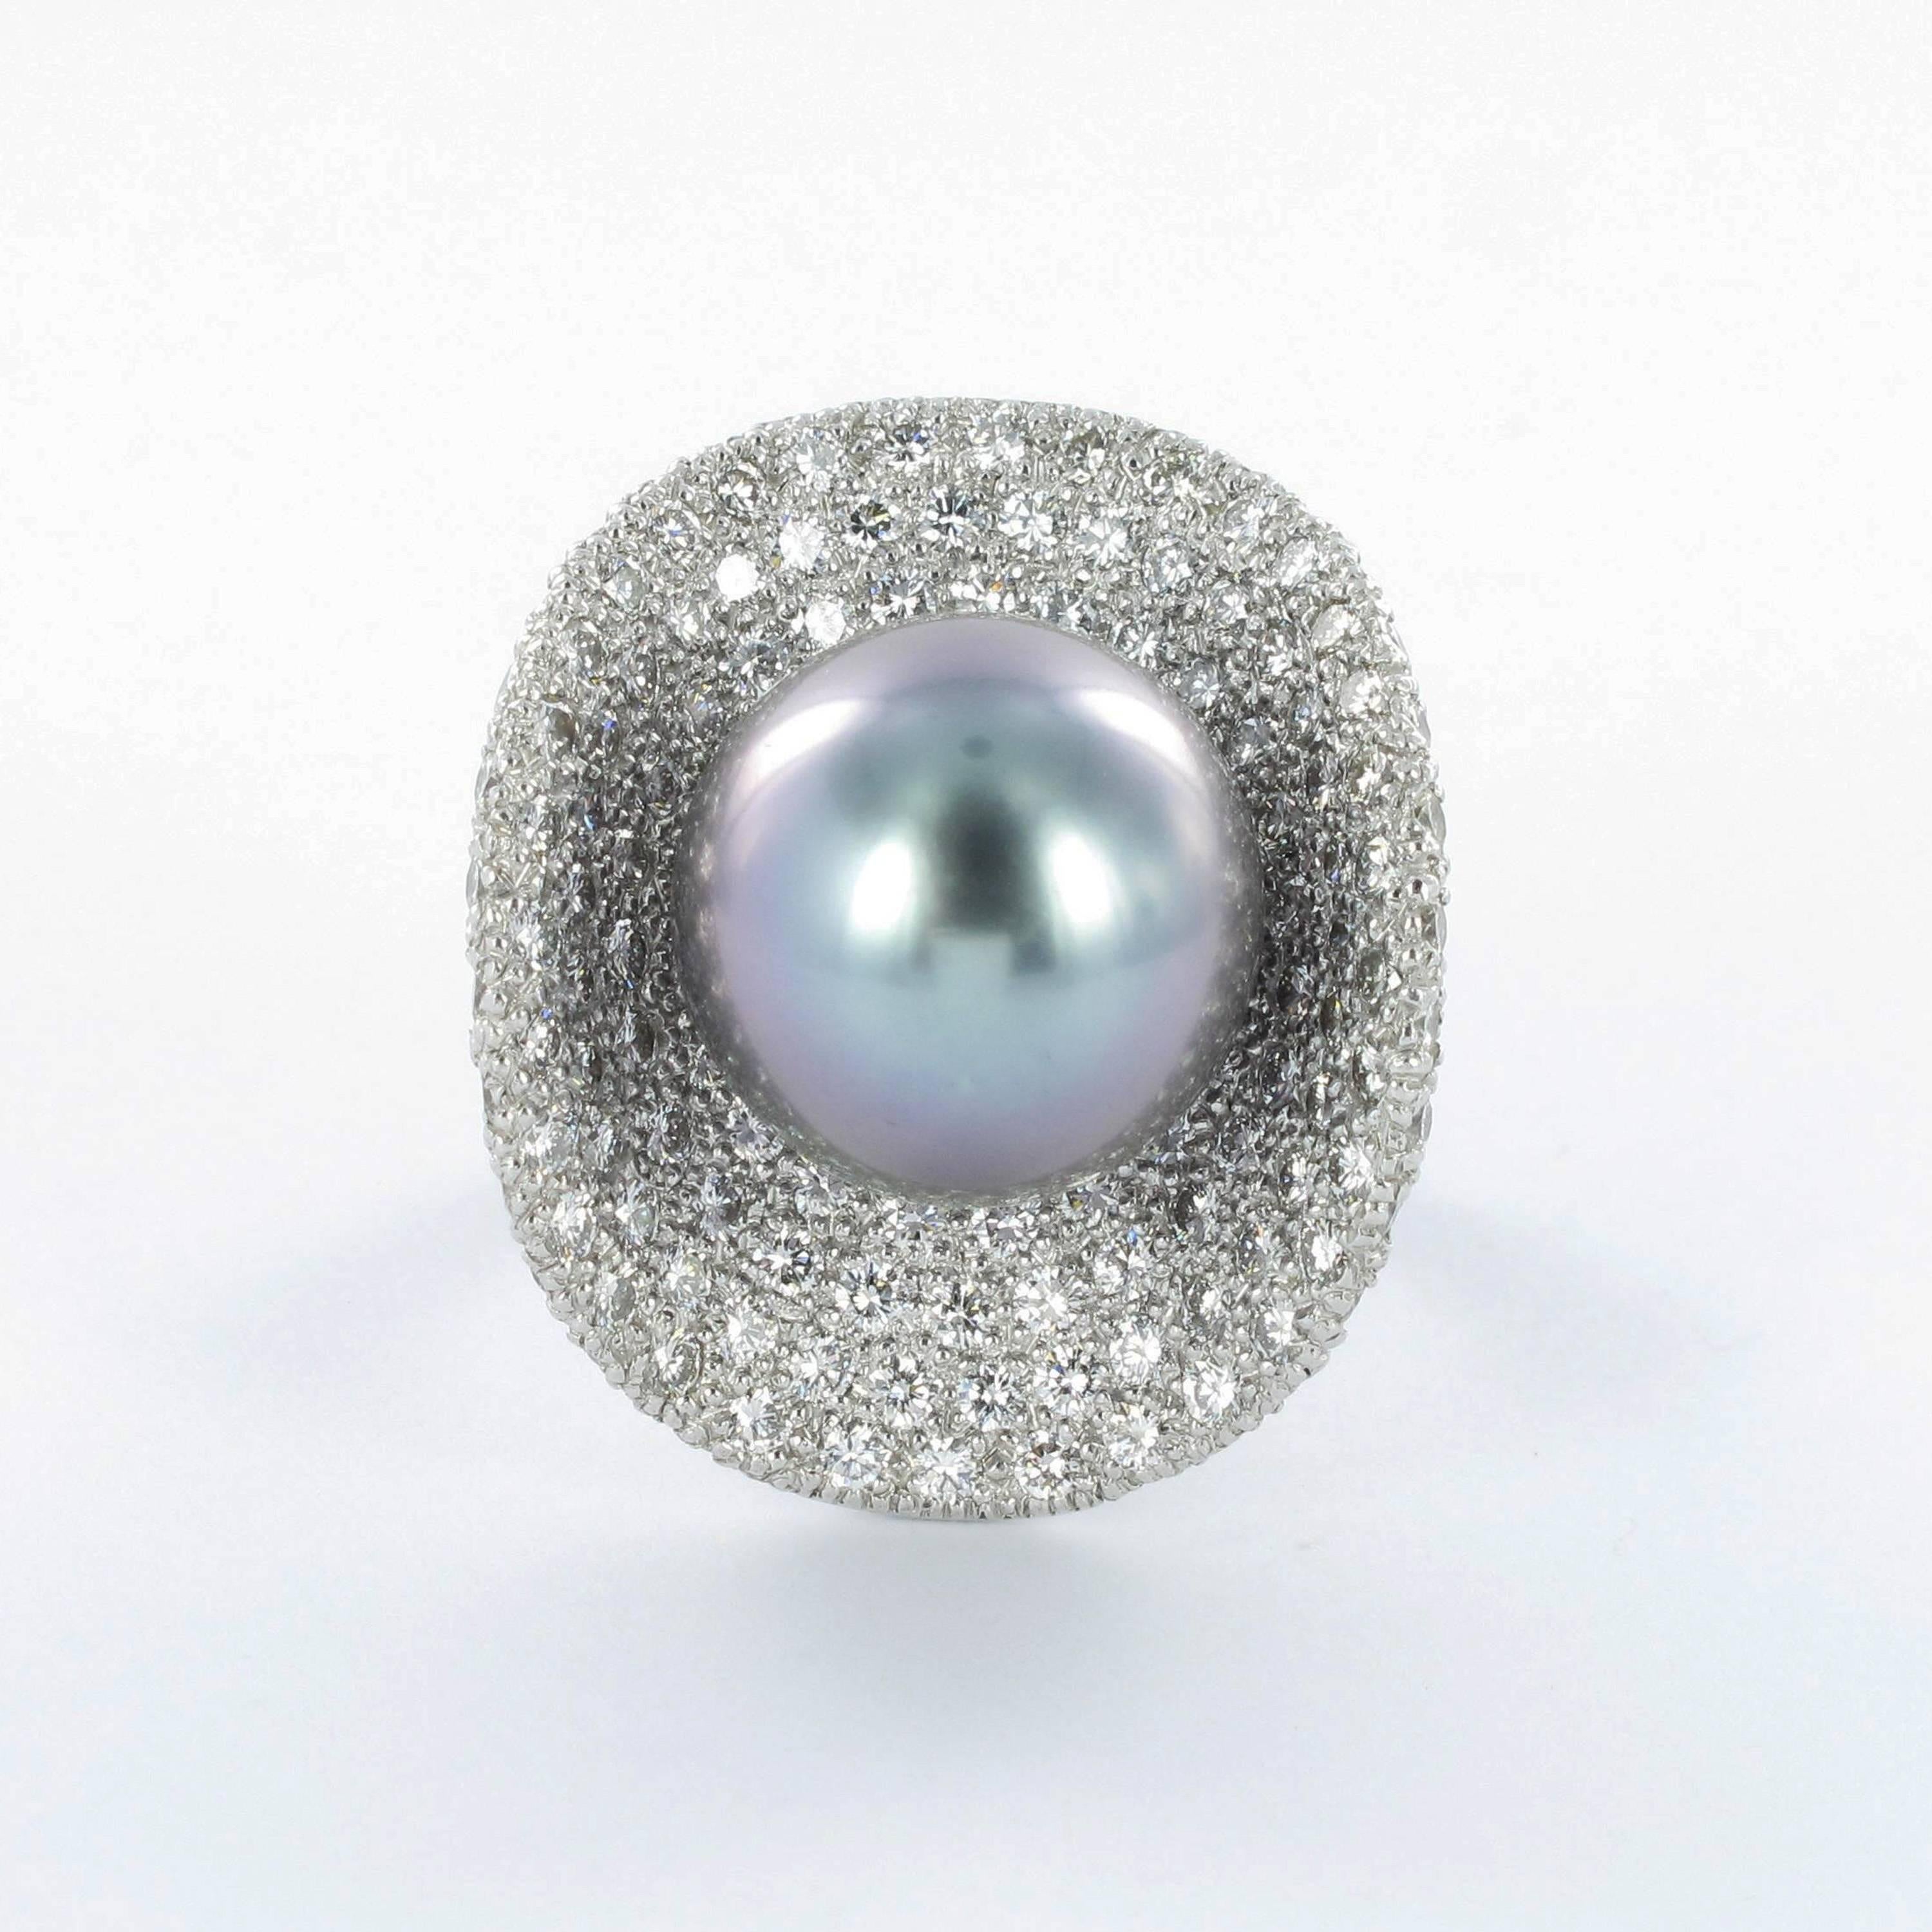 This handcrafted ring in 18k white gold features a particularly attractive Tahitian cultured pearl of 13.7 mm diameter. The pearl is embedded in a field of 319 exqusitely pave set brilliant cut diamonds totalling 6.24 carats of G/H colour and vs